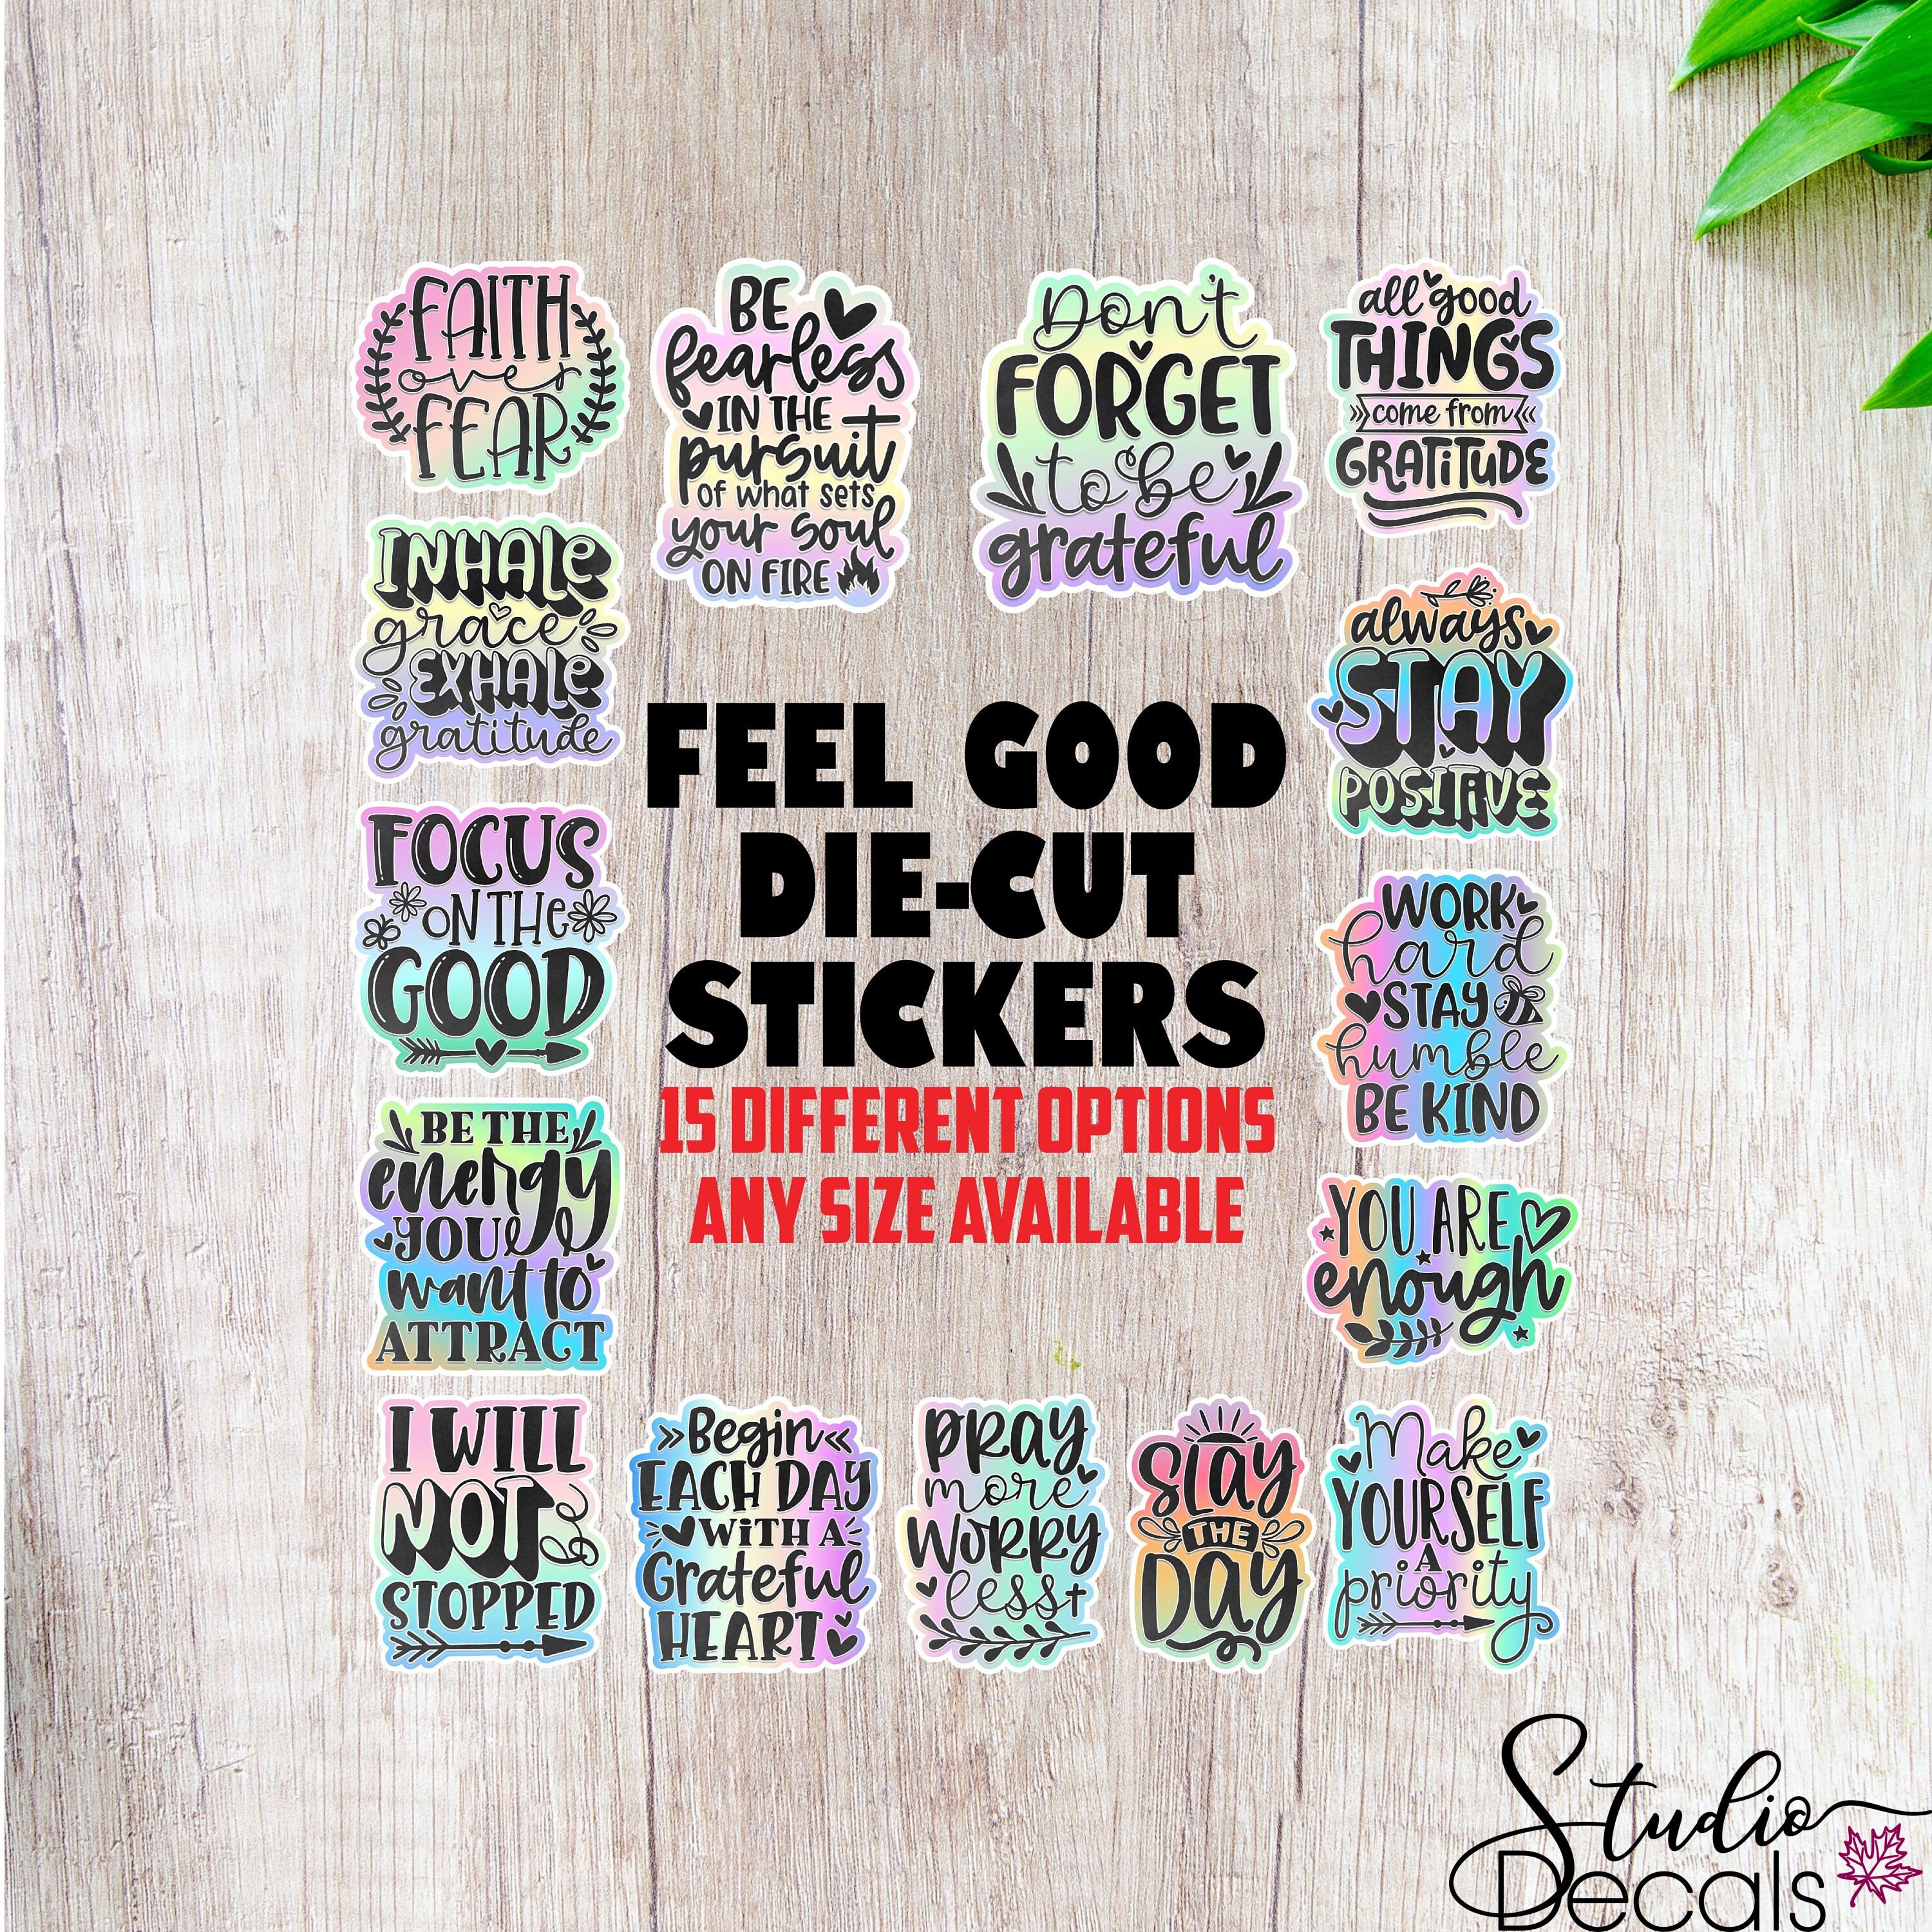  You Look Mean I Am Move Stickers - 2 Pack of 3 Stickers -  Waterproof Vinyl for Car, Phone, Water Bottle, Laptop - Funny Rude Joke  Quote Saying Decals (2-Pack)